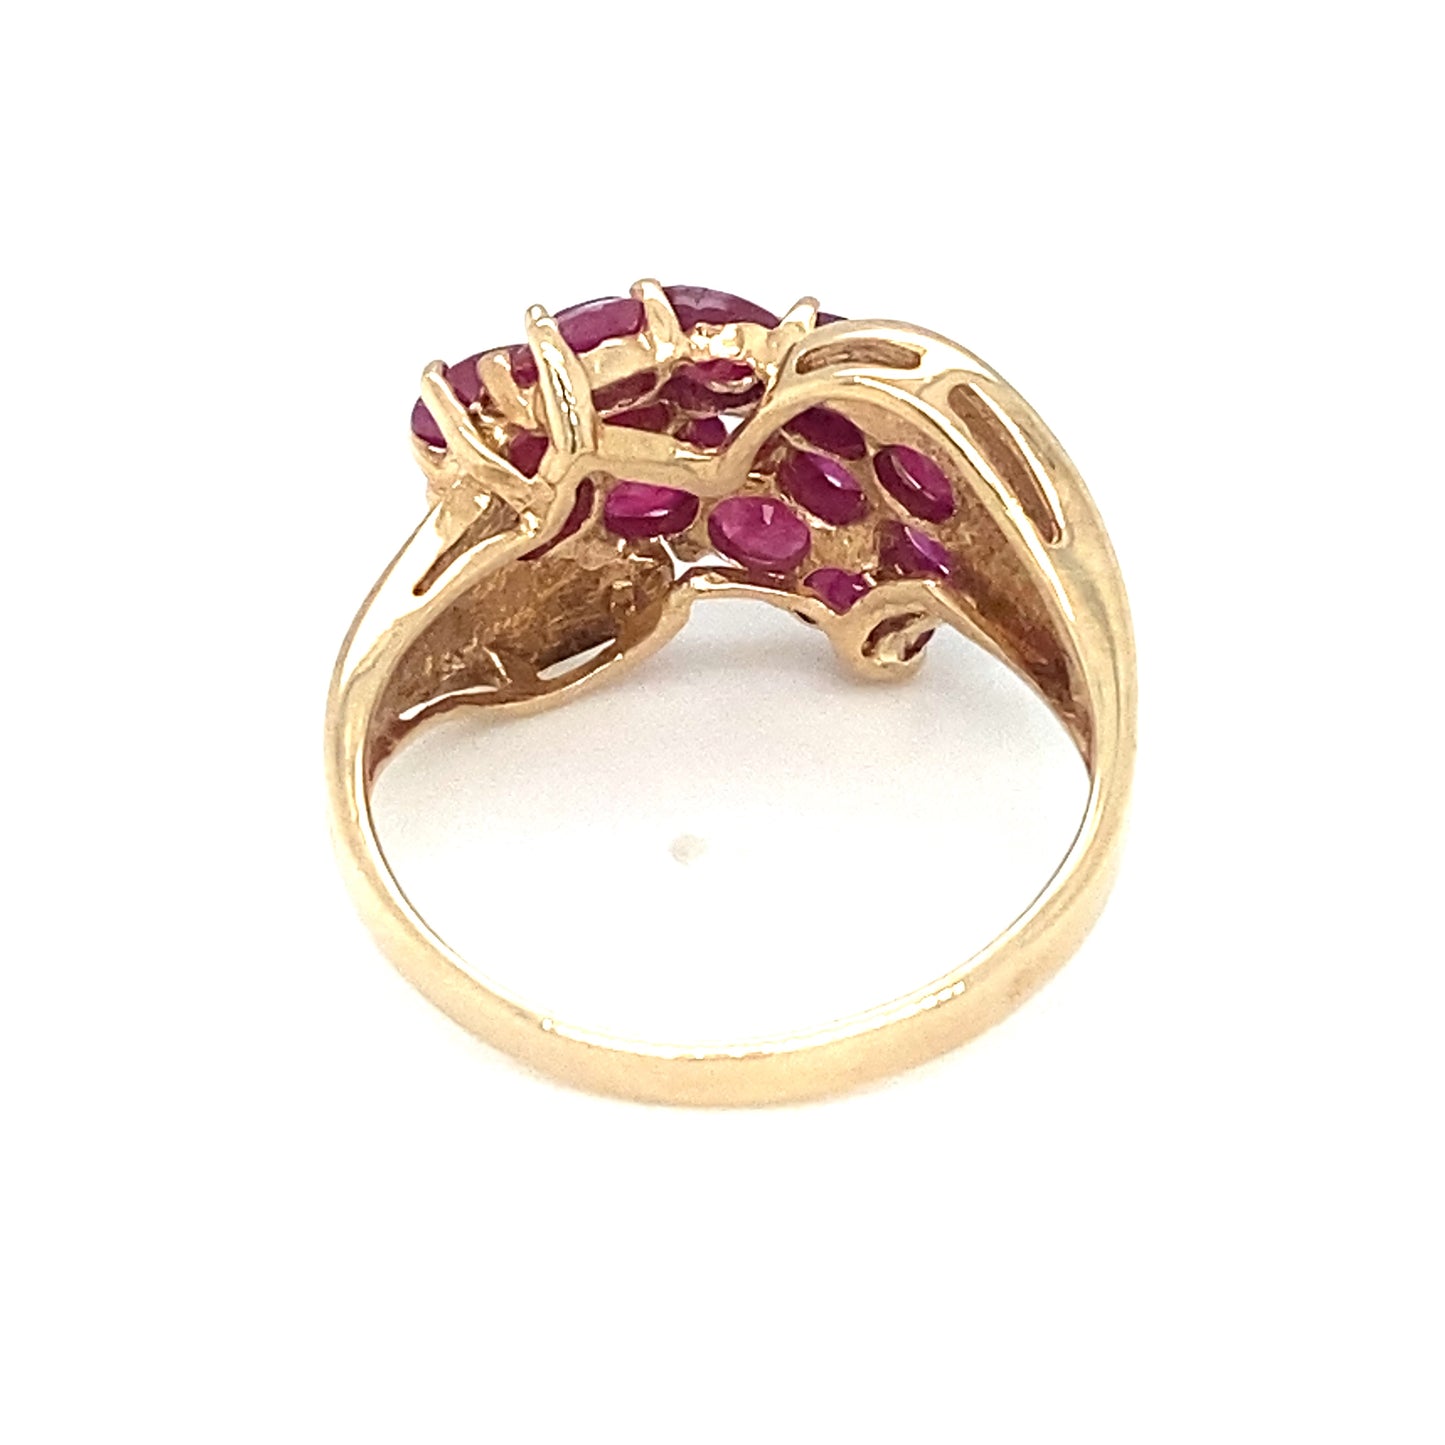 Circa 1960s Three Row Ruby Cocktail Ring in 10K Gold